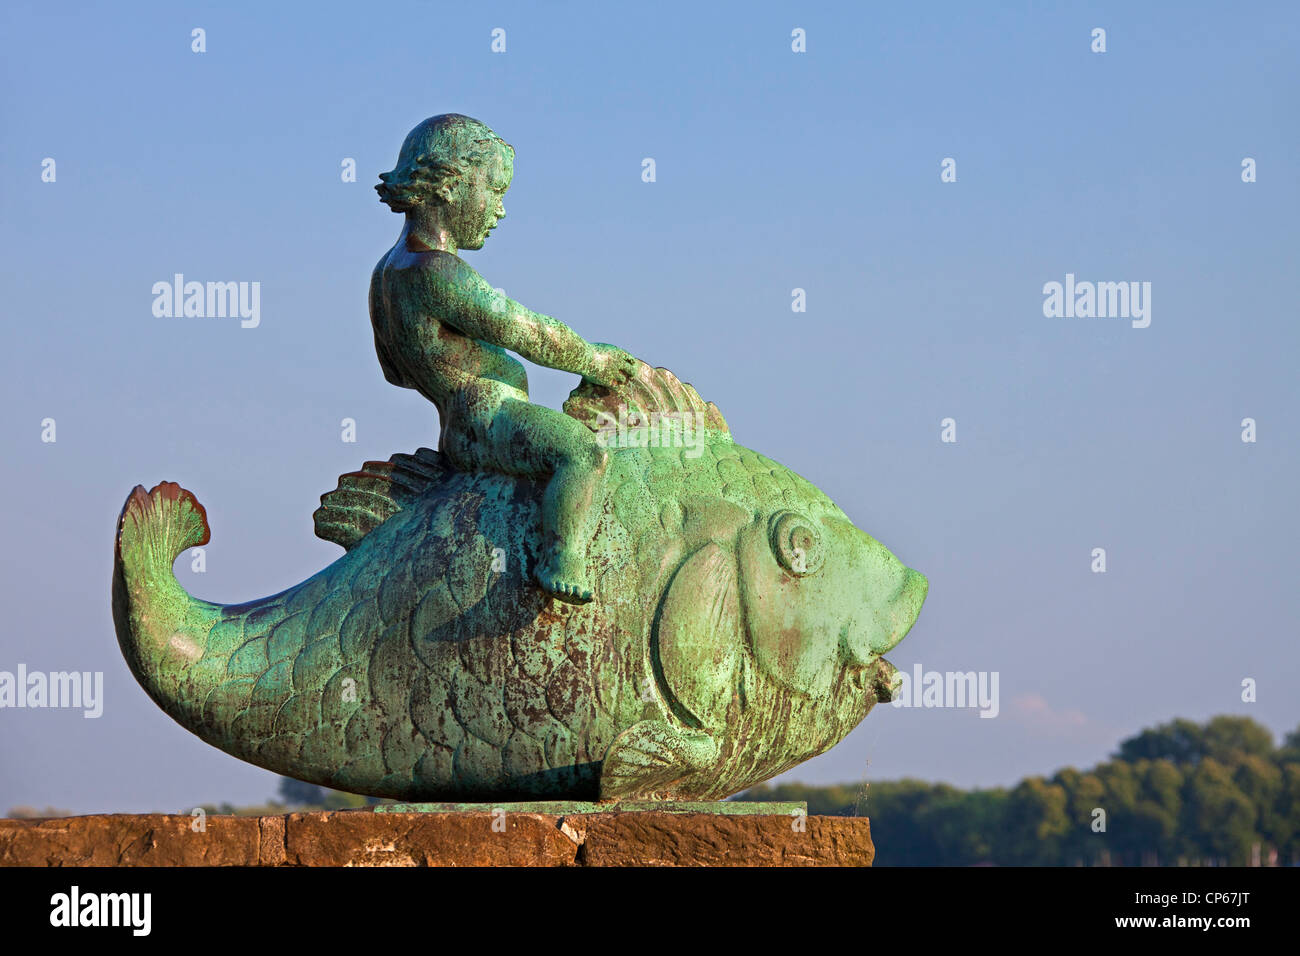 The sculpture Putto auf dem Fisch / Putto on the fish along the Maschsee, an artificial lake in Hanover, Lower Saxony, Germany Stock Photo